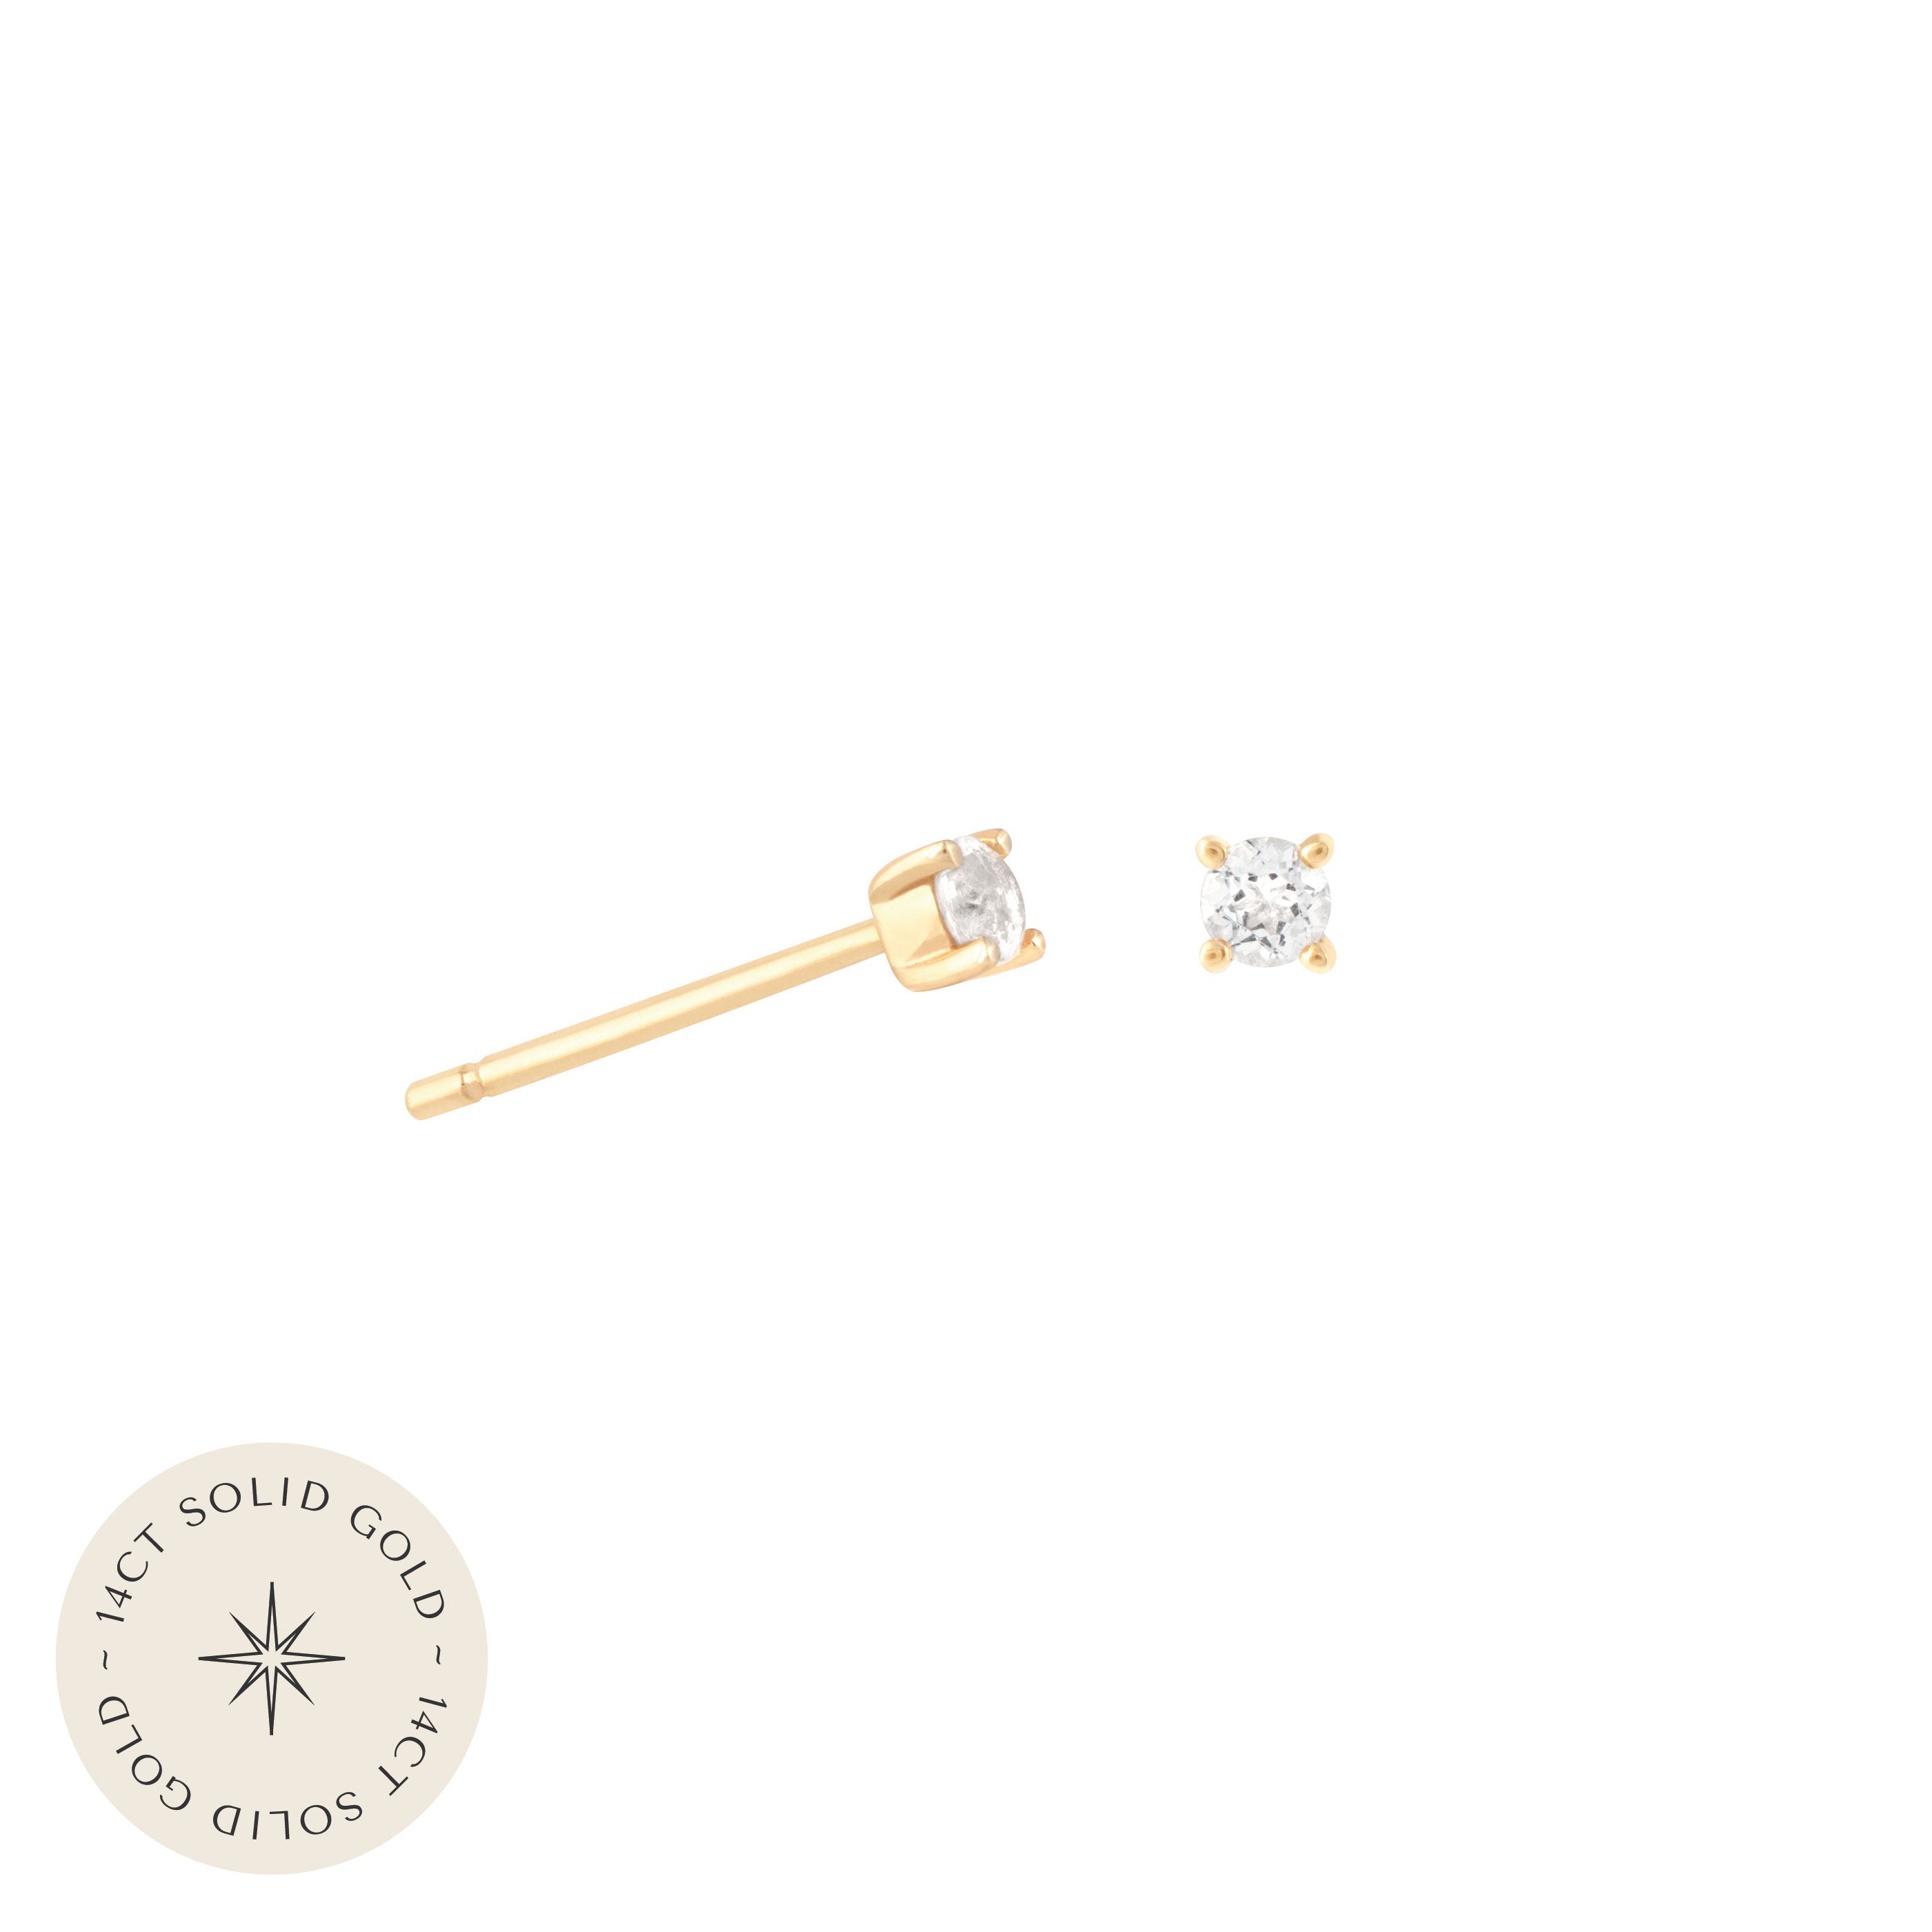 Topaz Stud Earrings in Solid Gold with 14CT solid gold label